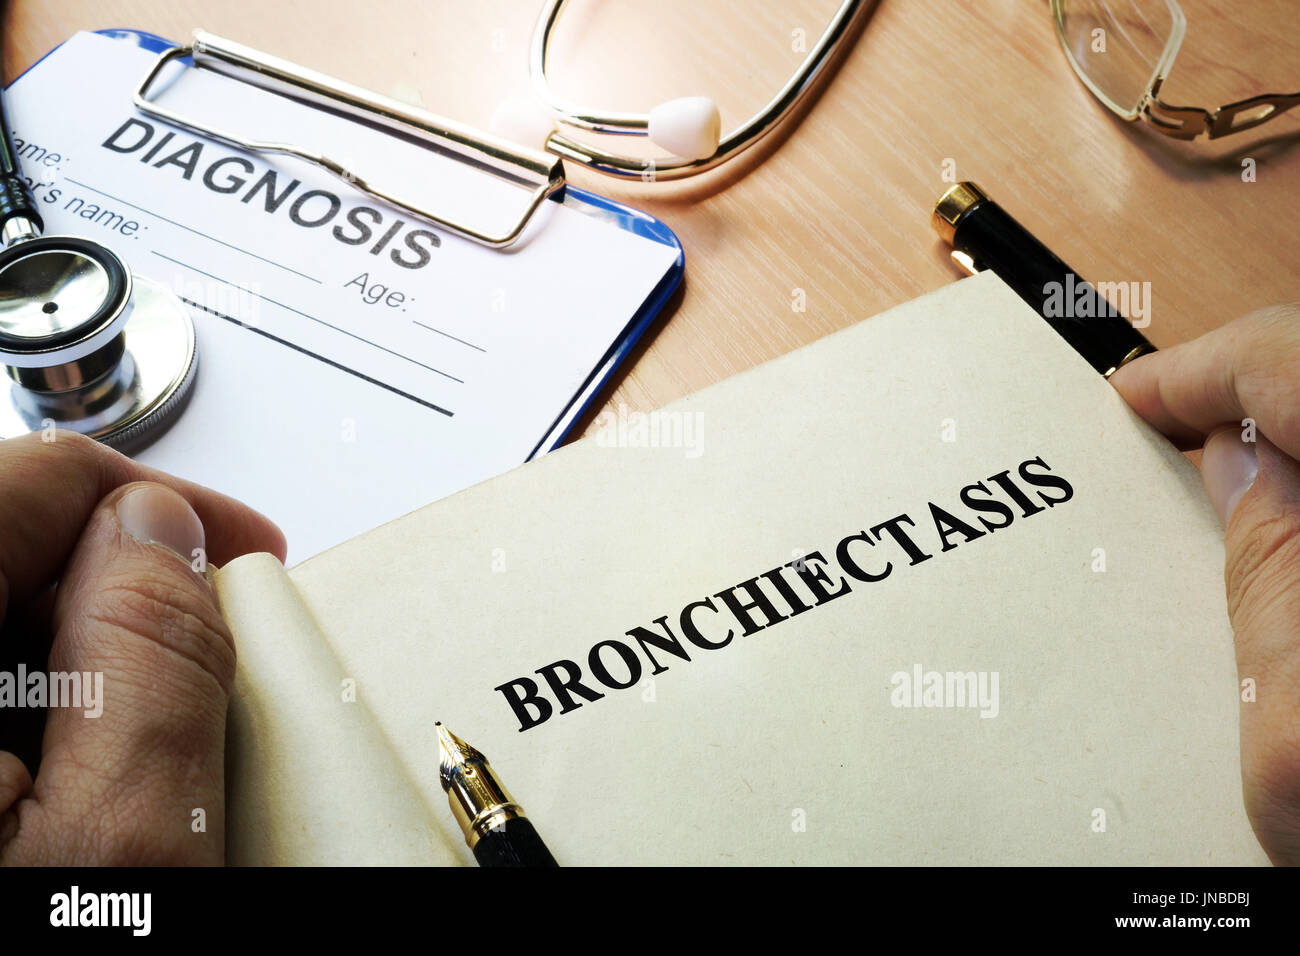 Book with title Bronchiectasis in a clinic. Stock Photo